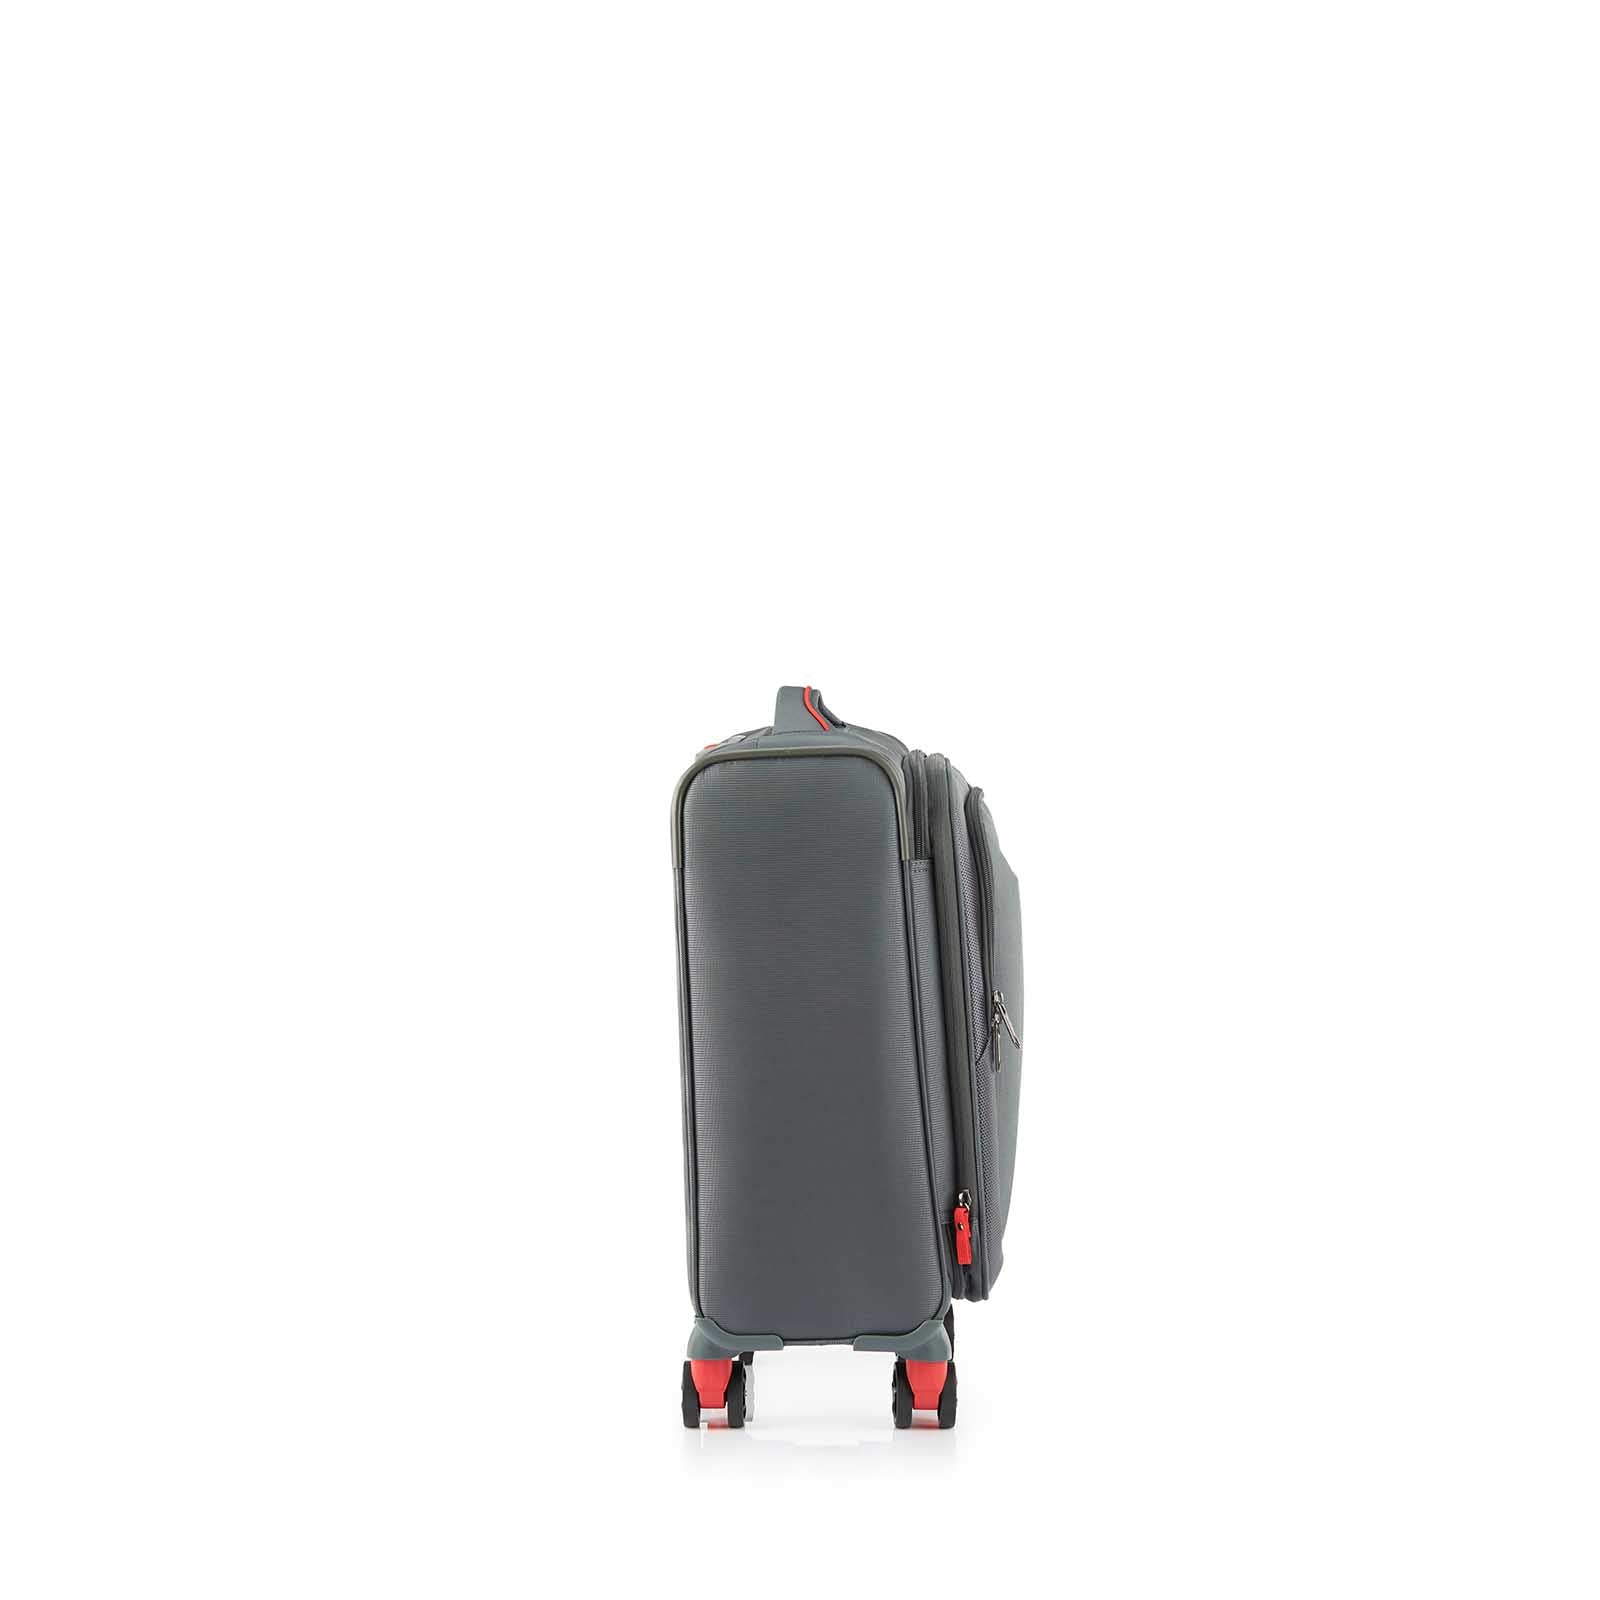 American-Tourister-Applite-4-Eco-55cm-Carry-On-Suitcase-Grey-Red-Side-LH